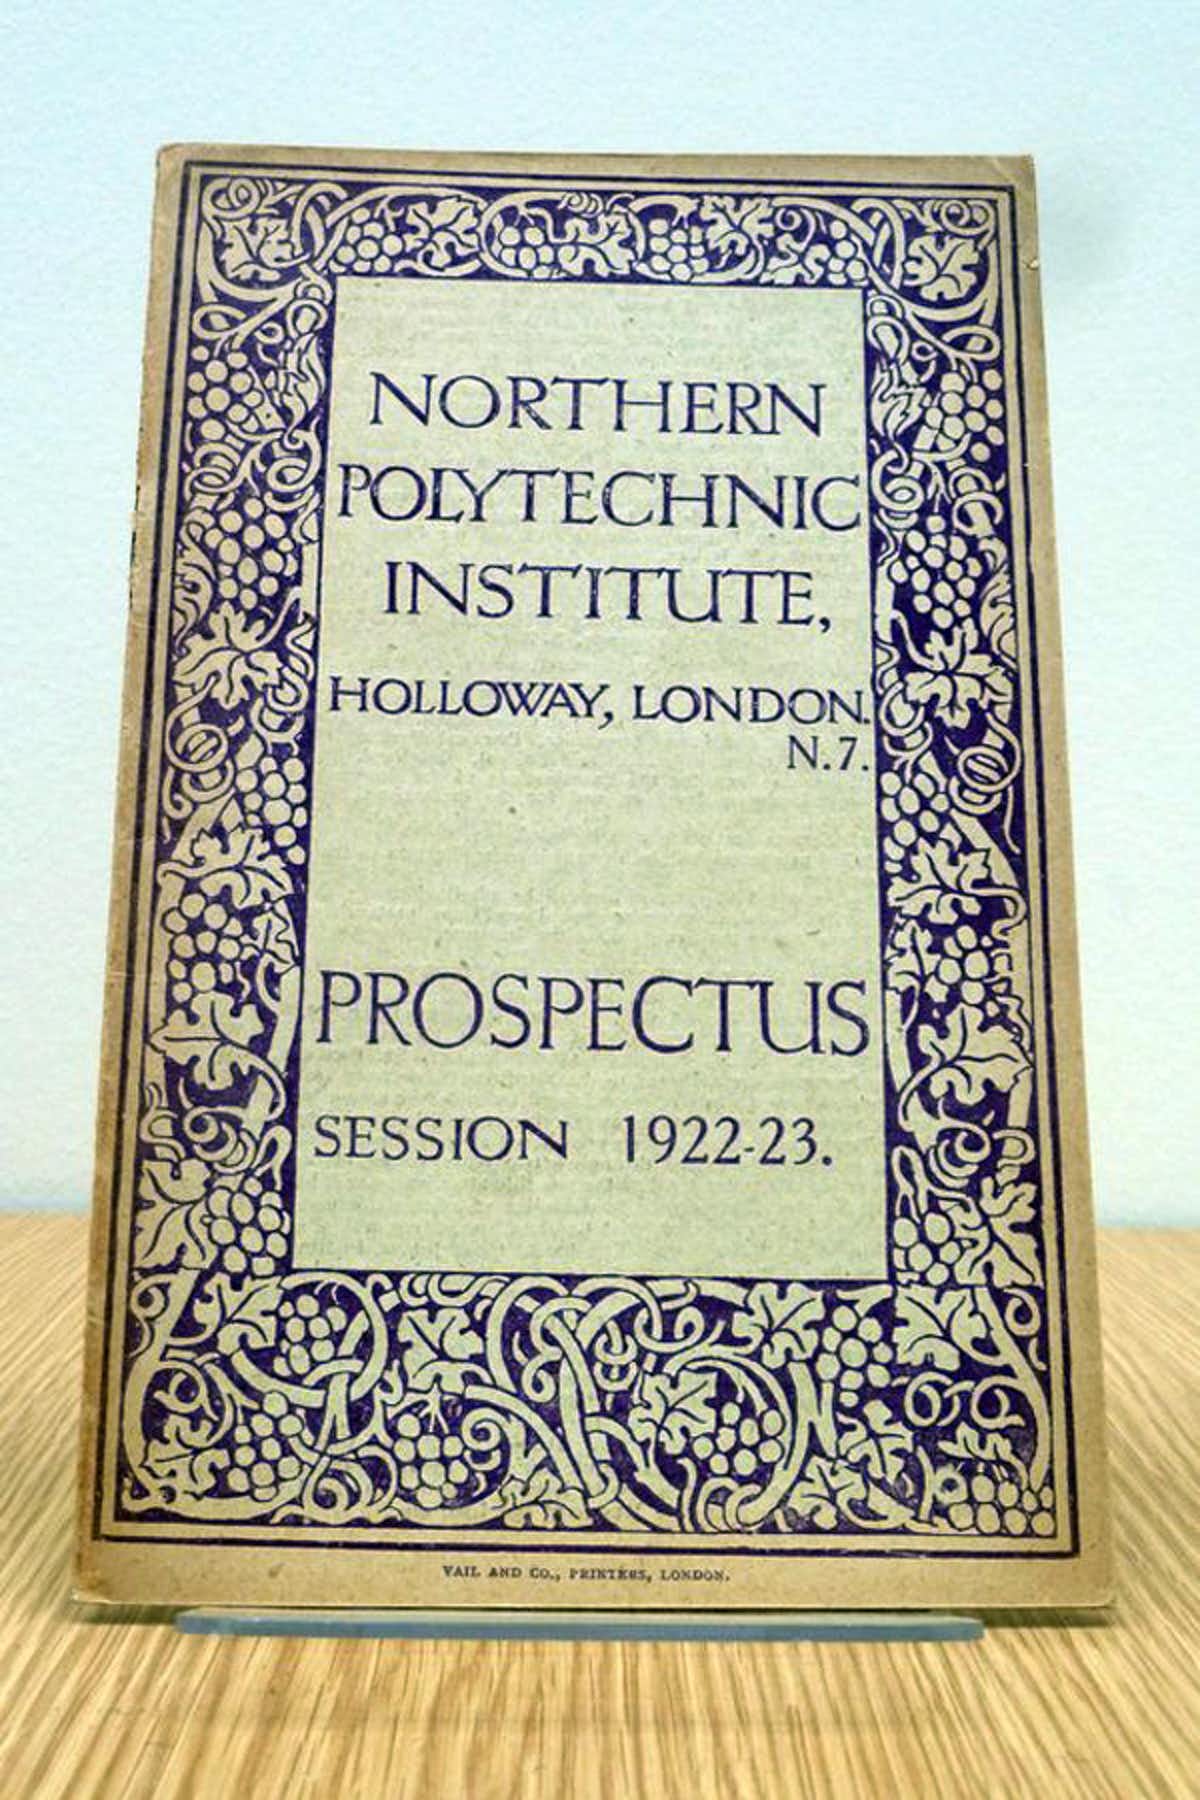 A prospectus from the Northern Polytechnic Institute from 1922-23. Landau began his rubber technology course in 1929